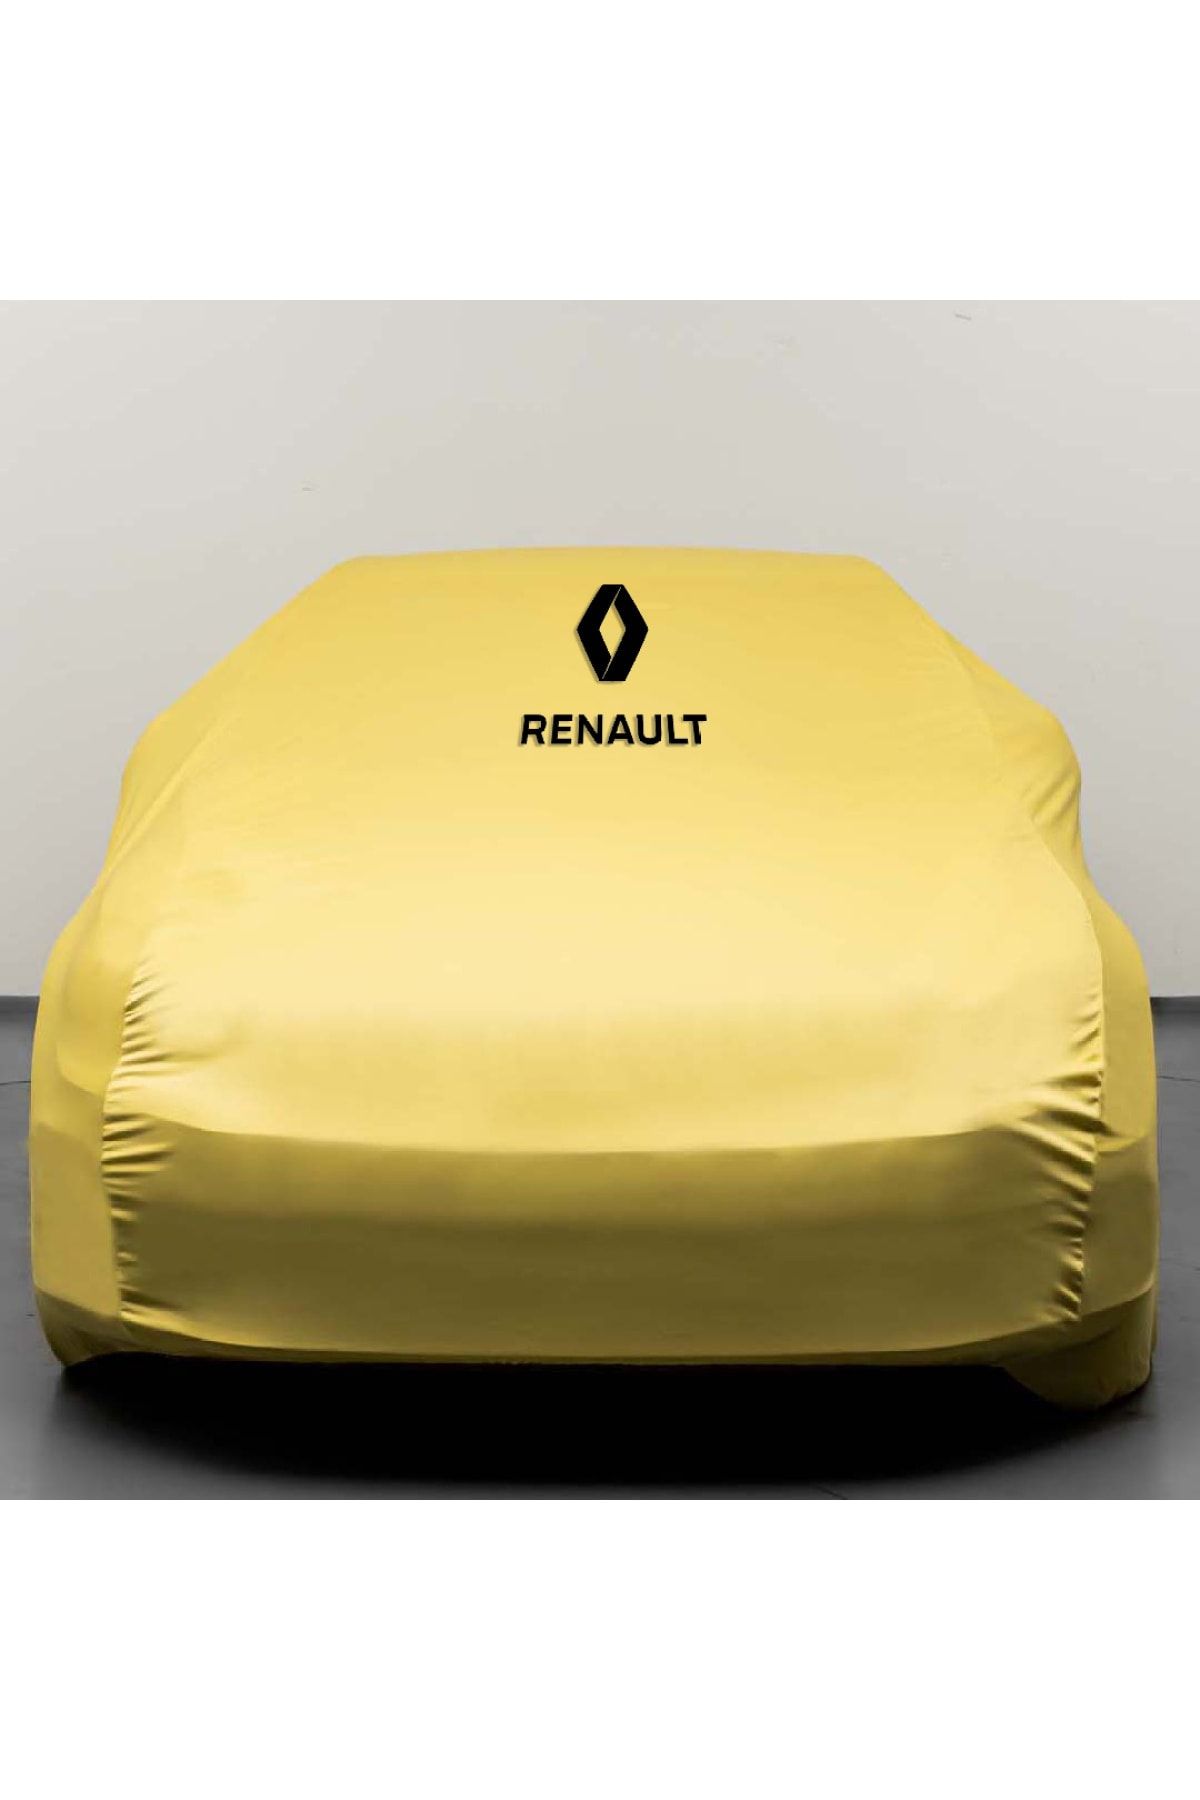 Teksin Renault Twingo 3 (2014-) Combed Cotton Car Cover with Black  Automobile Fabric Logo - Trendyol